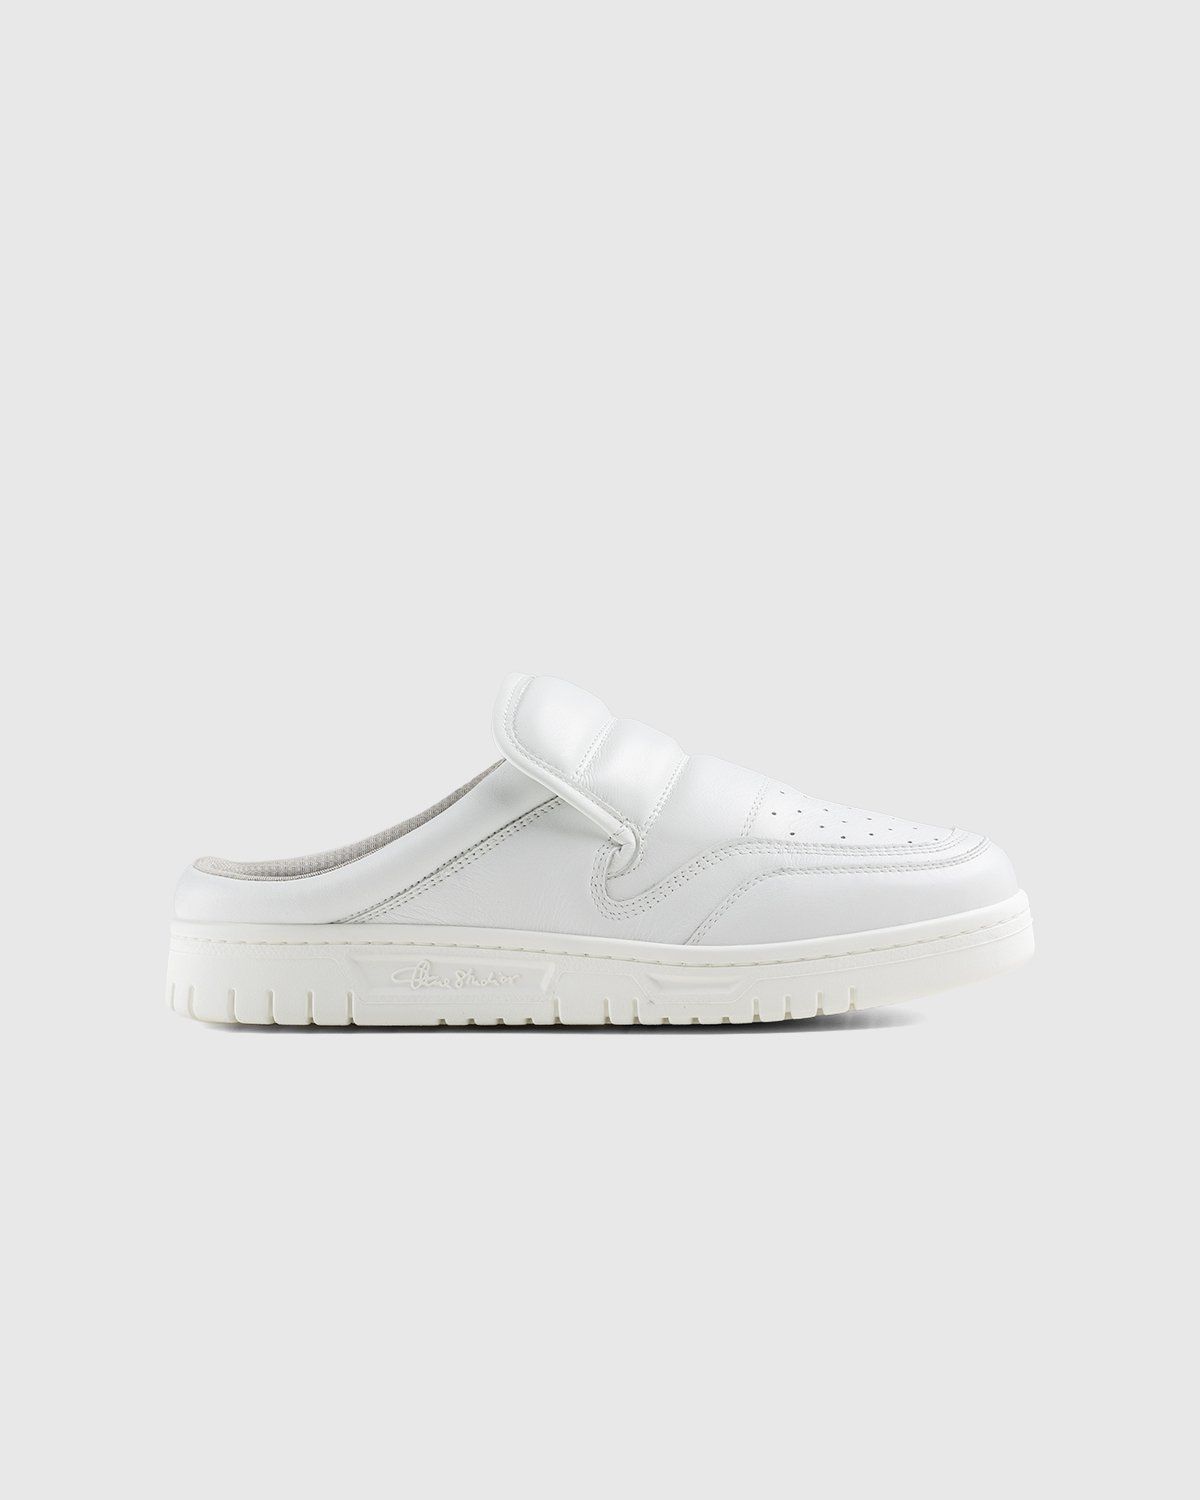 Acne Studios – Cow Leather Mule White - Image 1